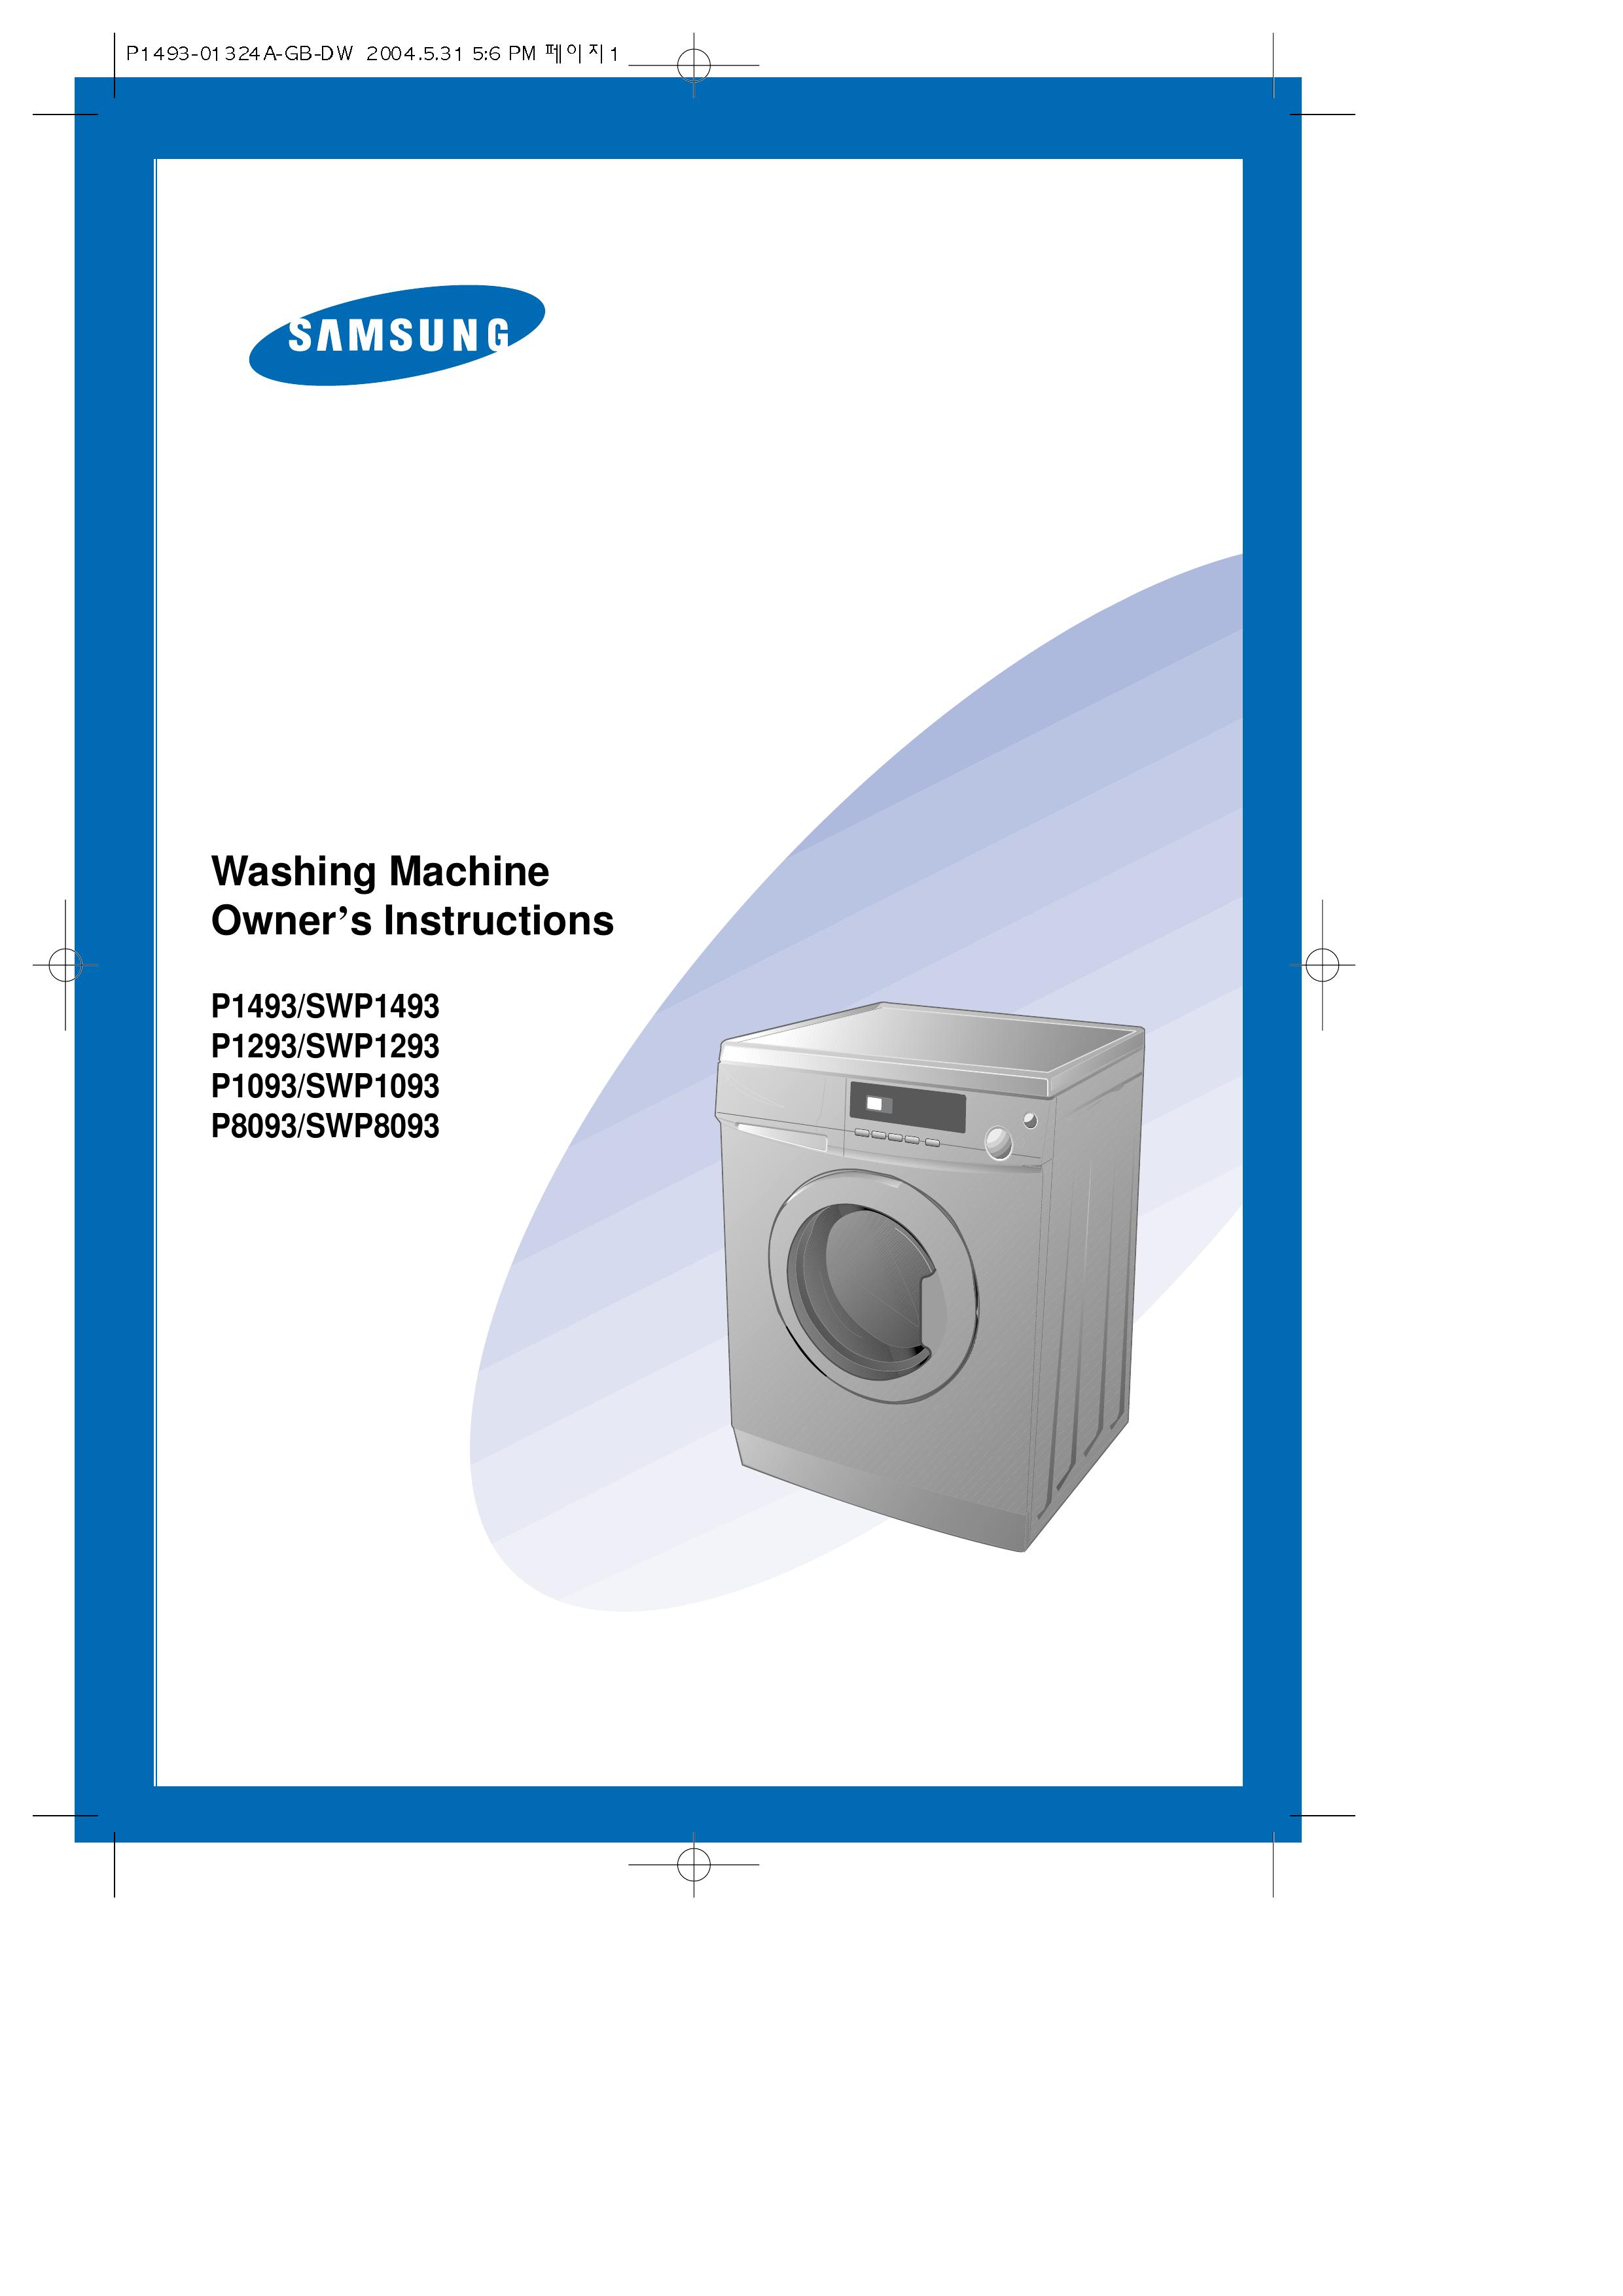 Samsung SWP1293 Washer/Dryer User Manual